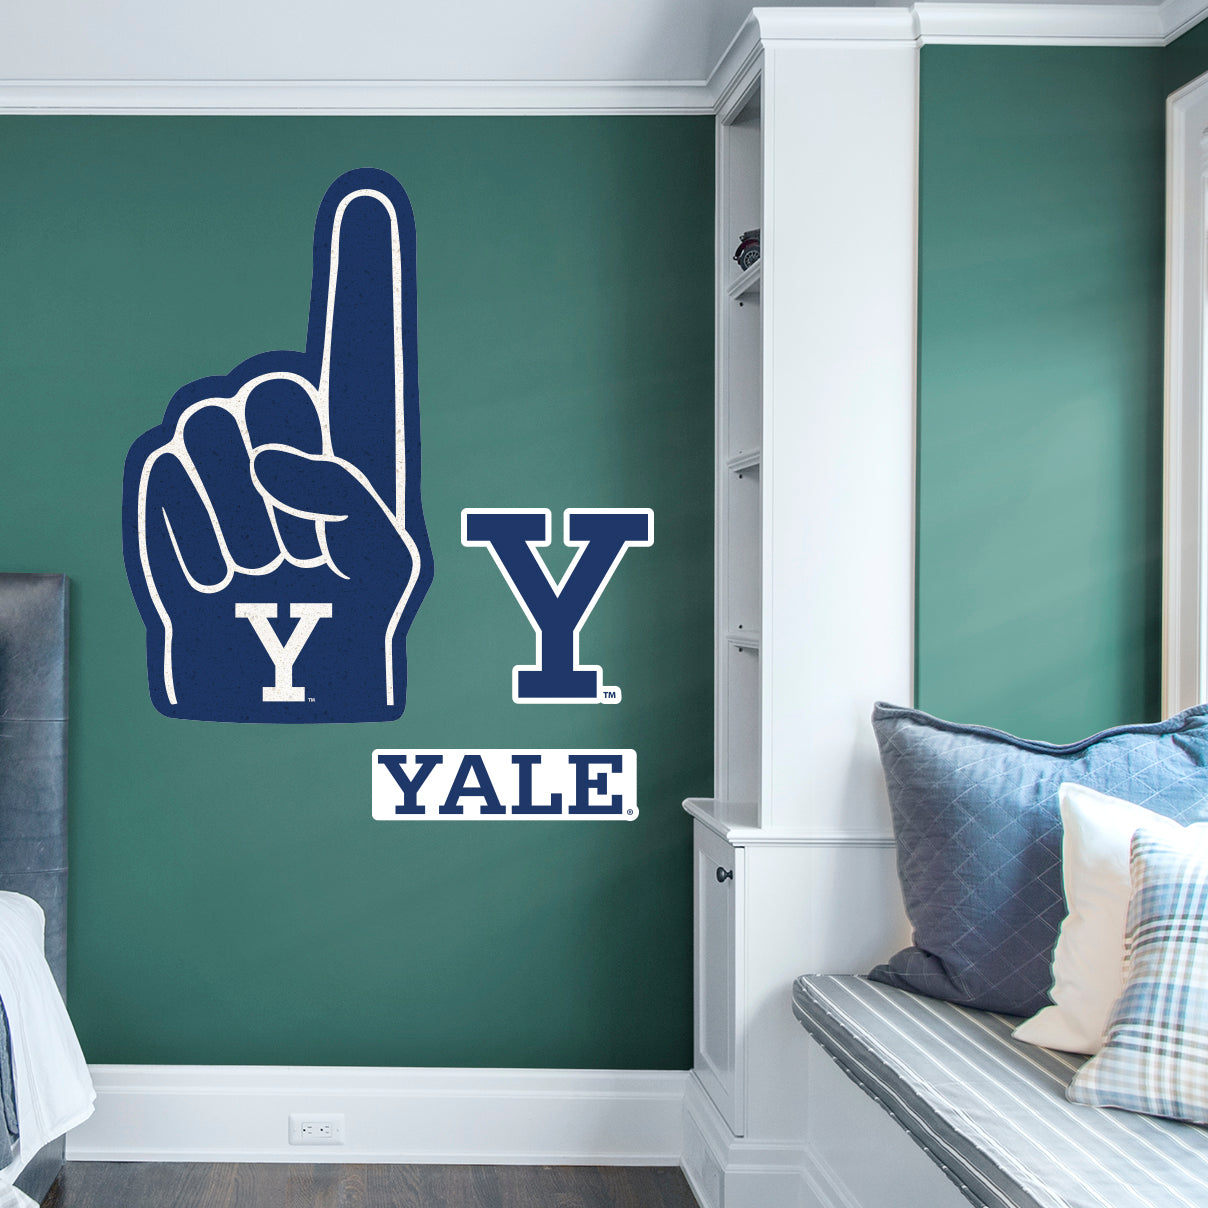 Yale Bulldogs:    Foam Finger        - Officially Licensed NCAA Removable     Adhesive Decal